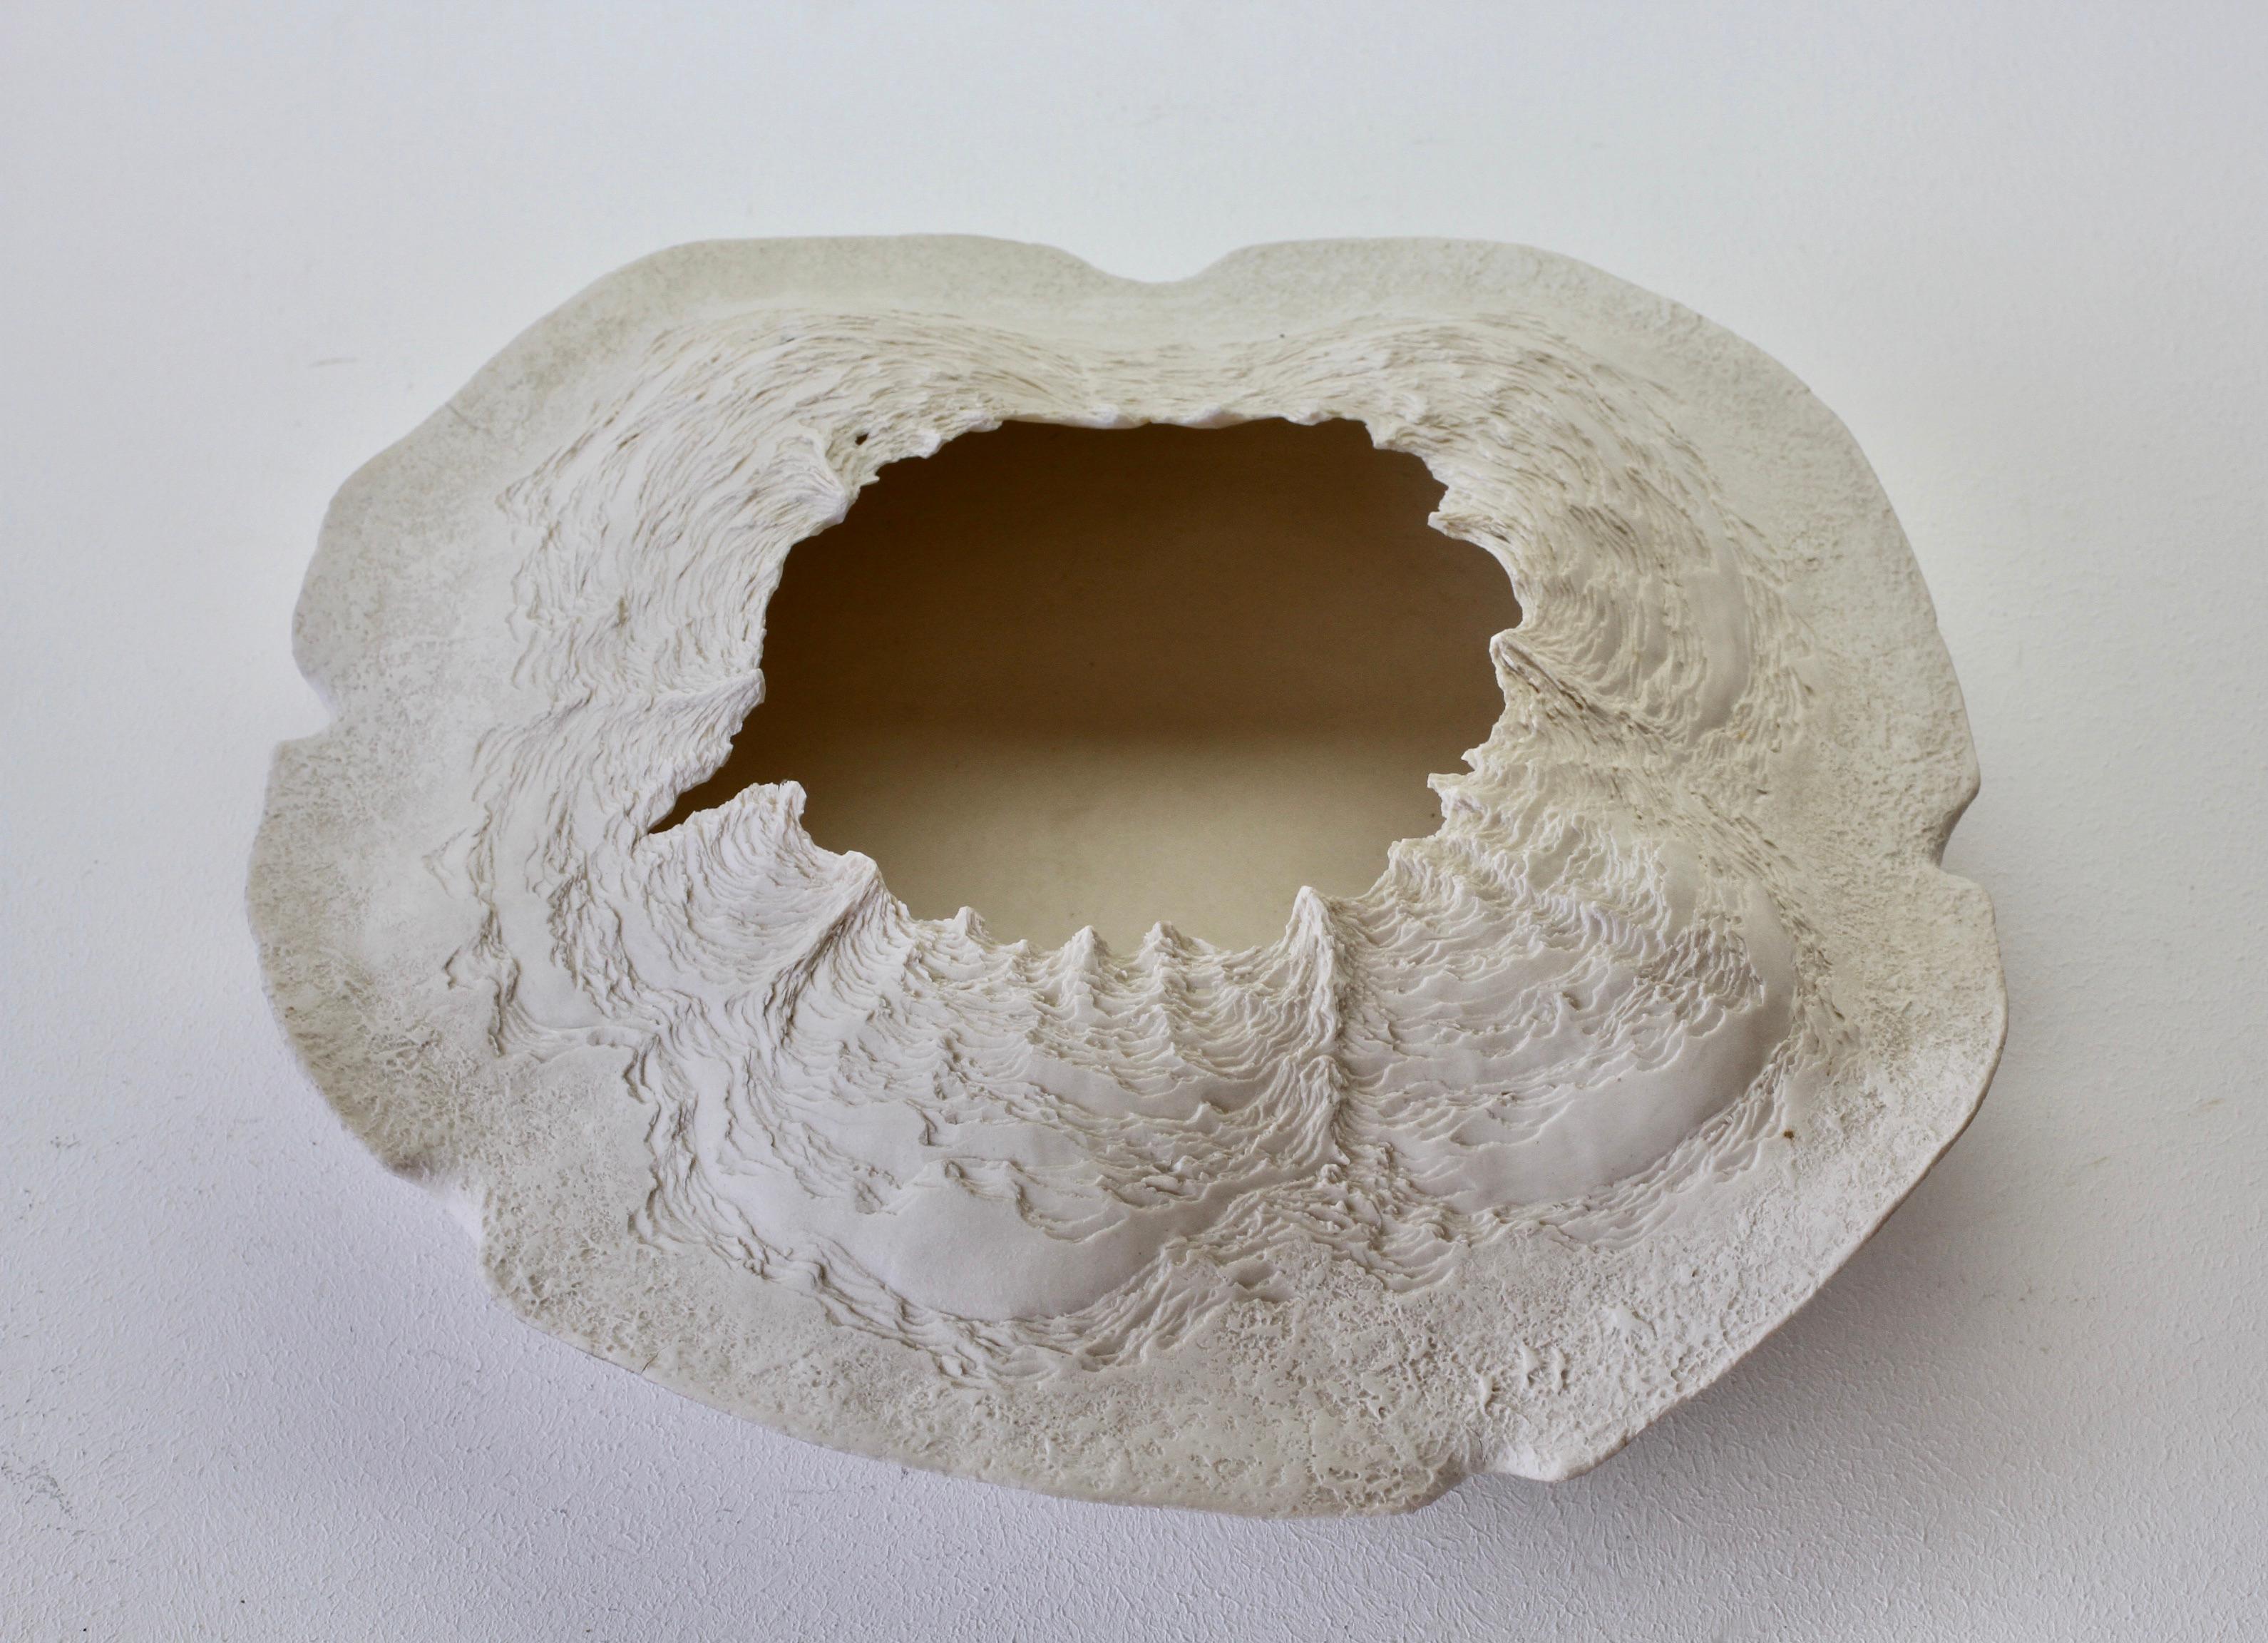 Hand-Carved Maggie Barnes Carved White Organic Art Pottery Sculpture Bowl or Dish circa 1987 For Sale